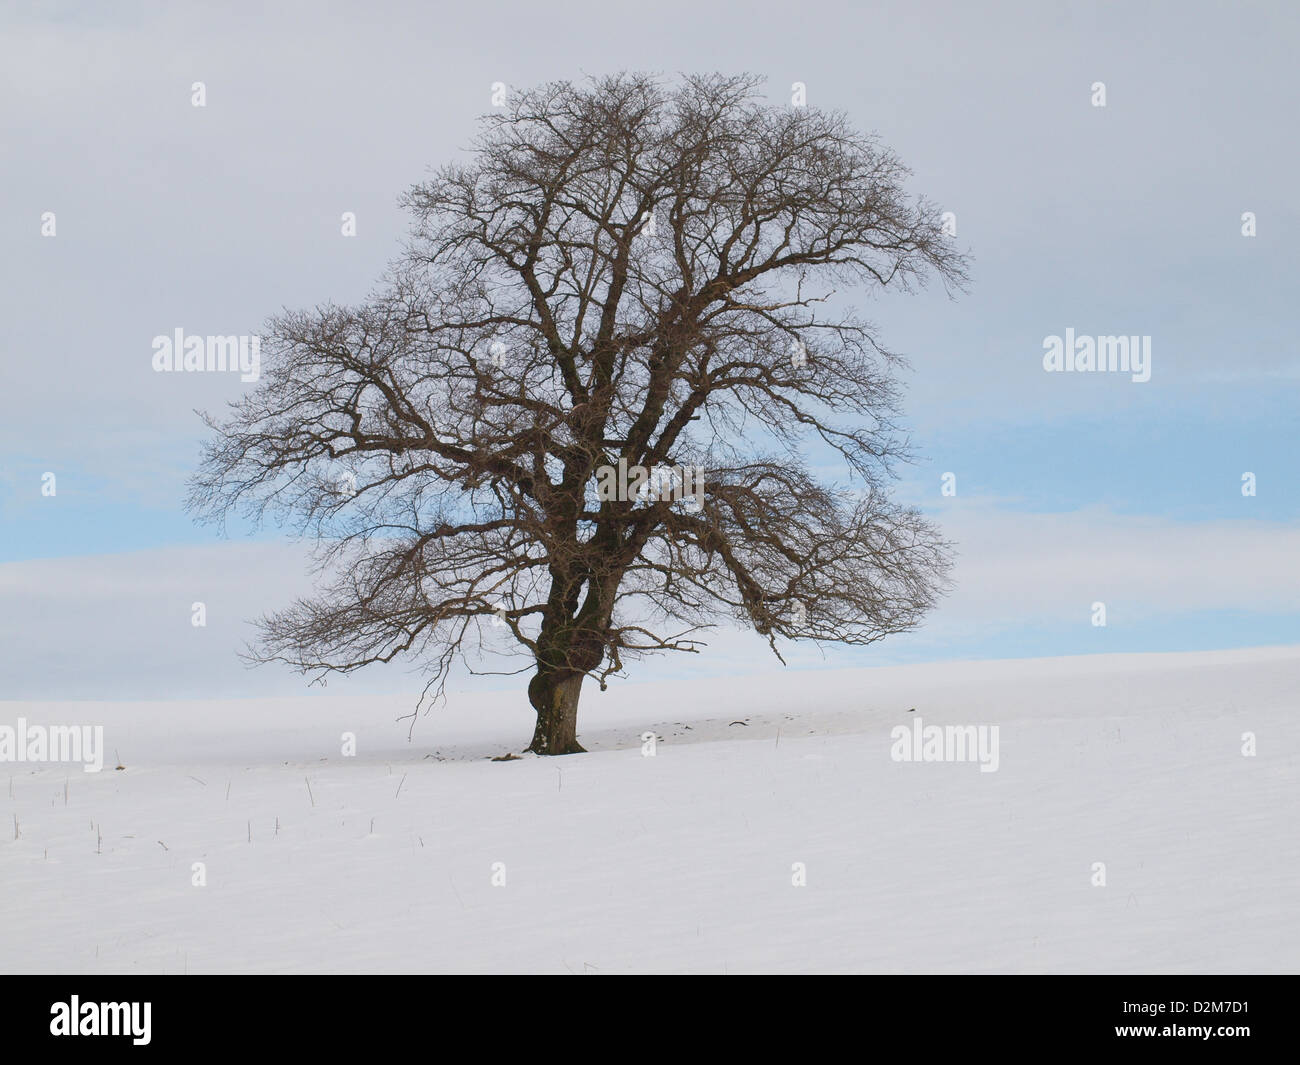 mature English elm tree (Ulmus Procera ) in rural farming landscape in Cumbria UK stands majestic among snow covered fields Stock Photo